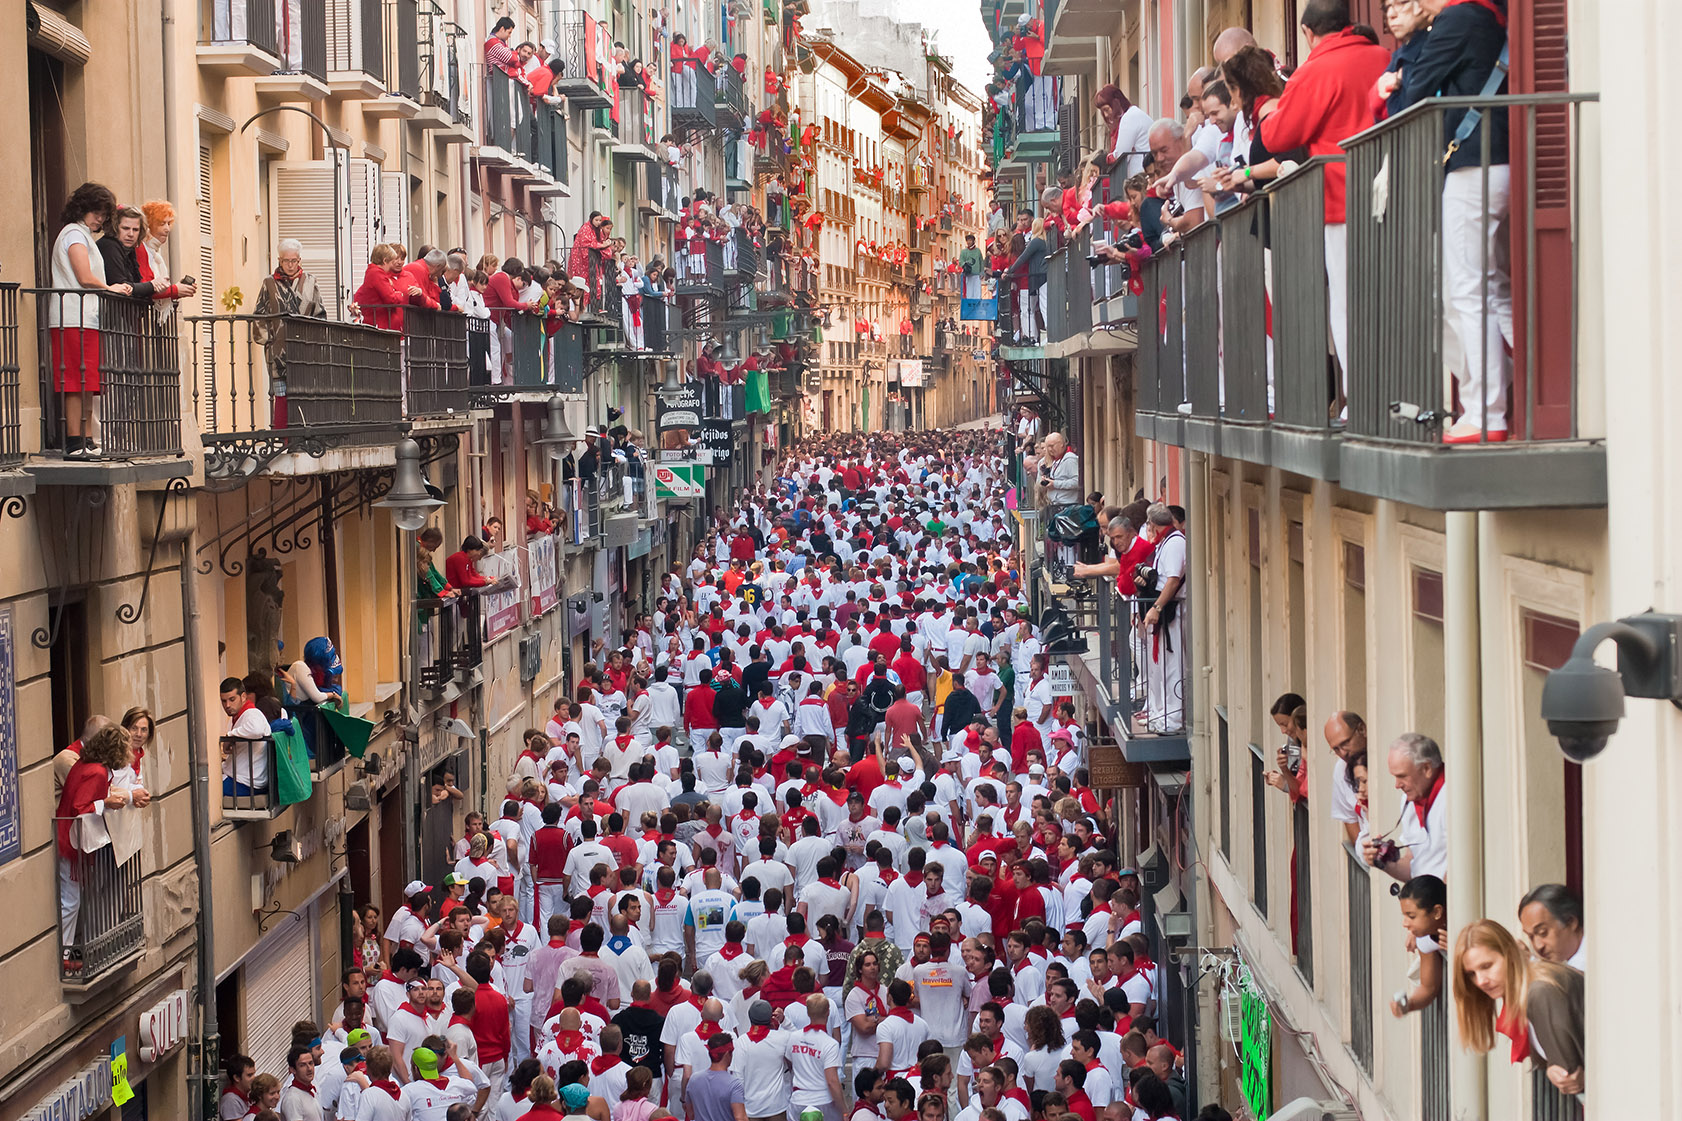 Street in Pamplona for the Running of the Bulls